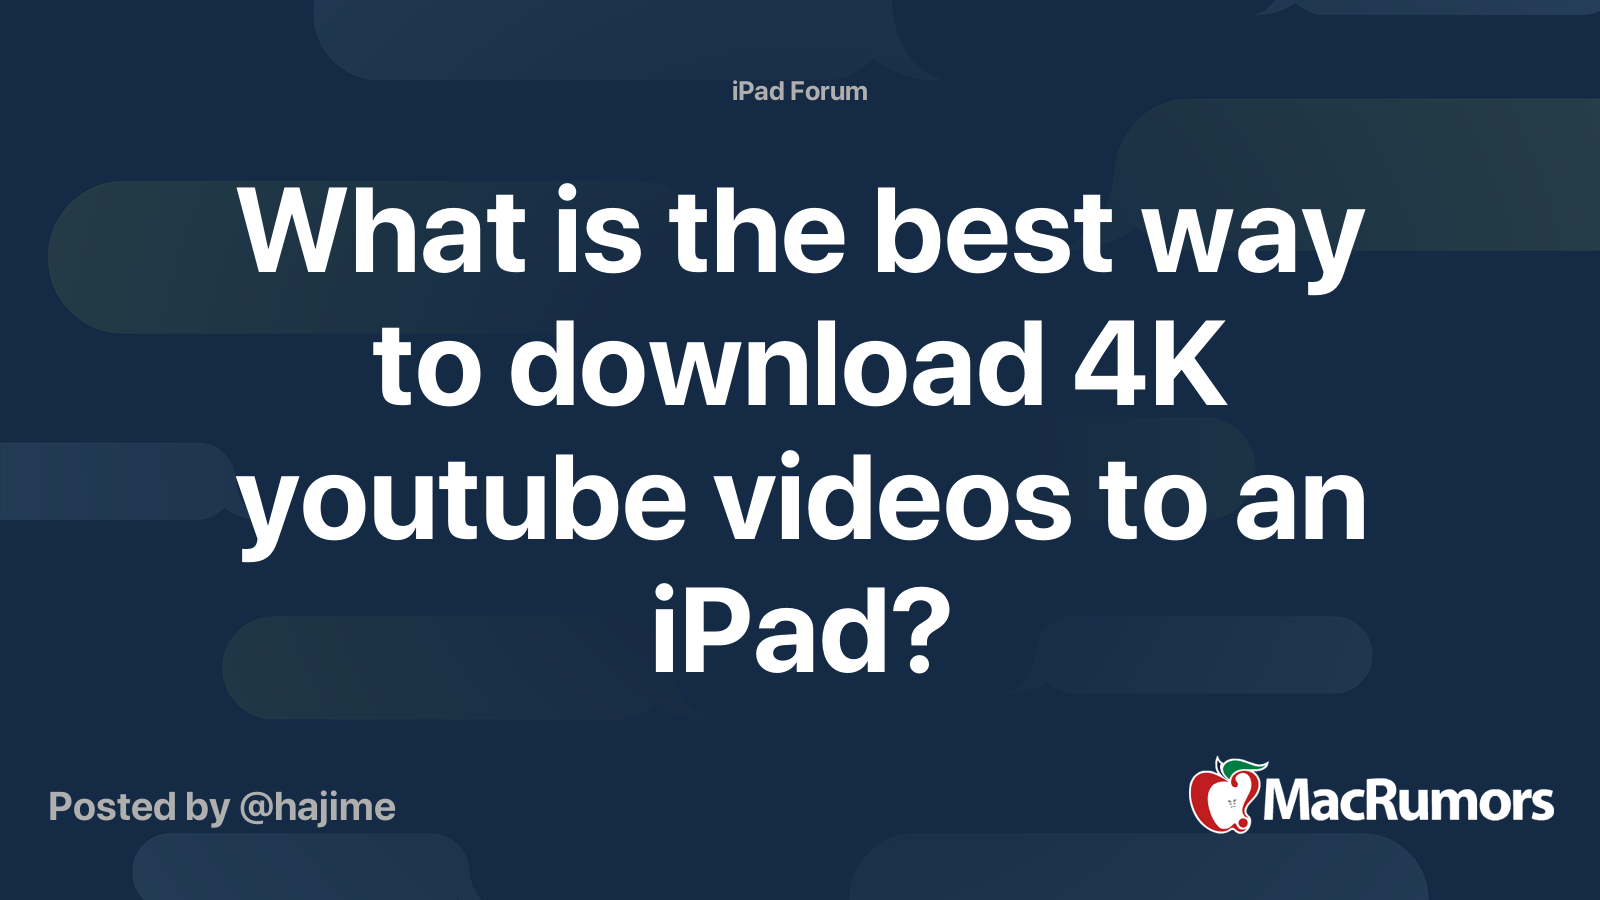 What is the best way to download 4K  videos to an iPad?